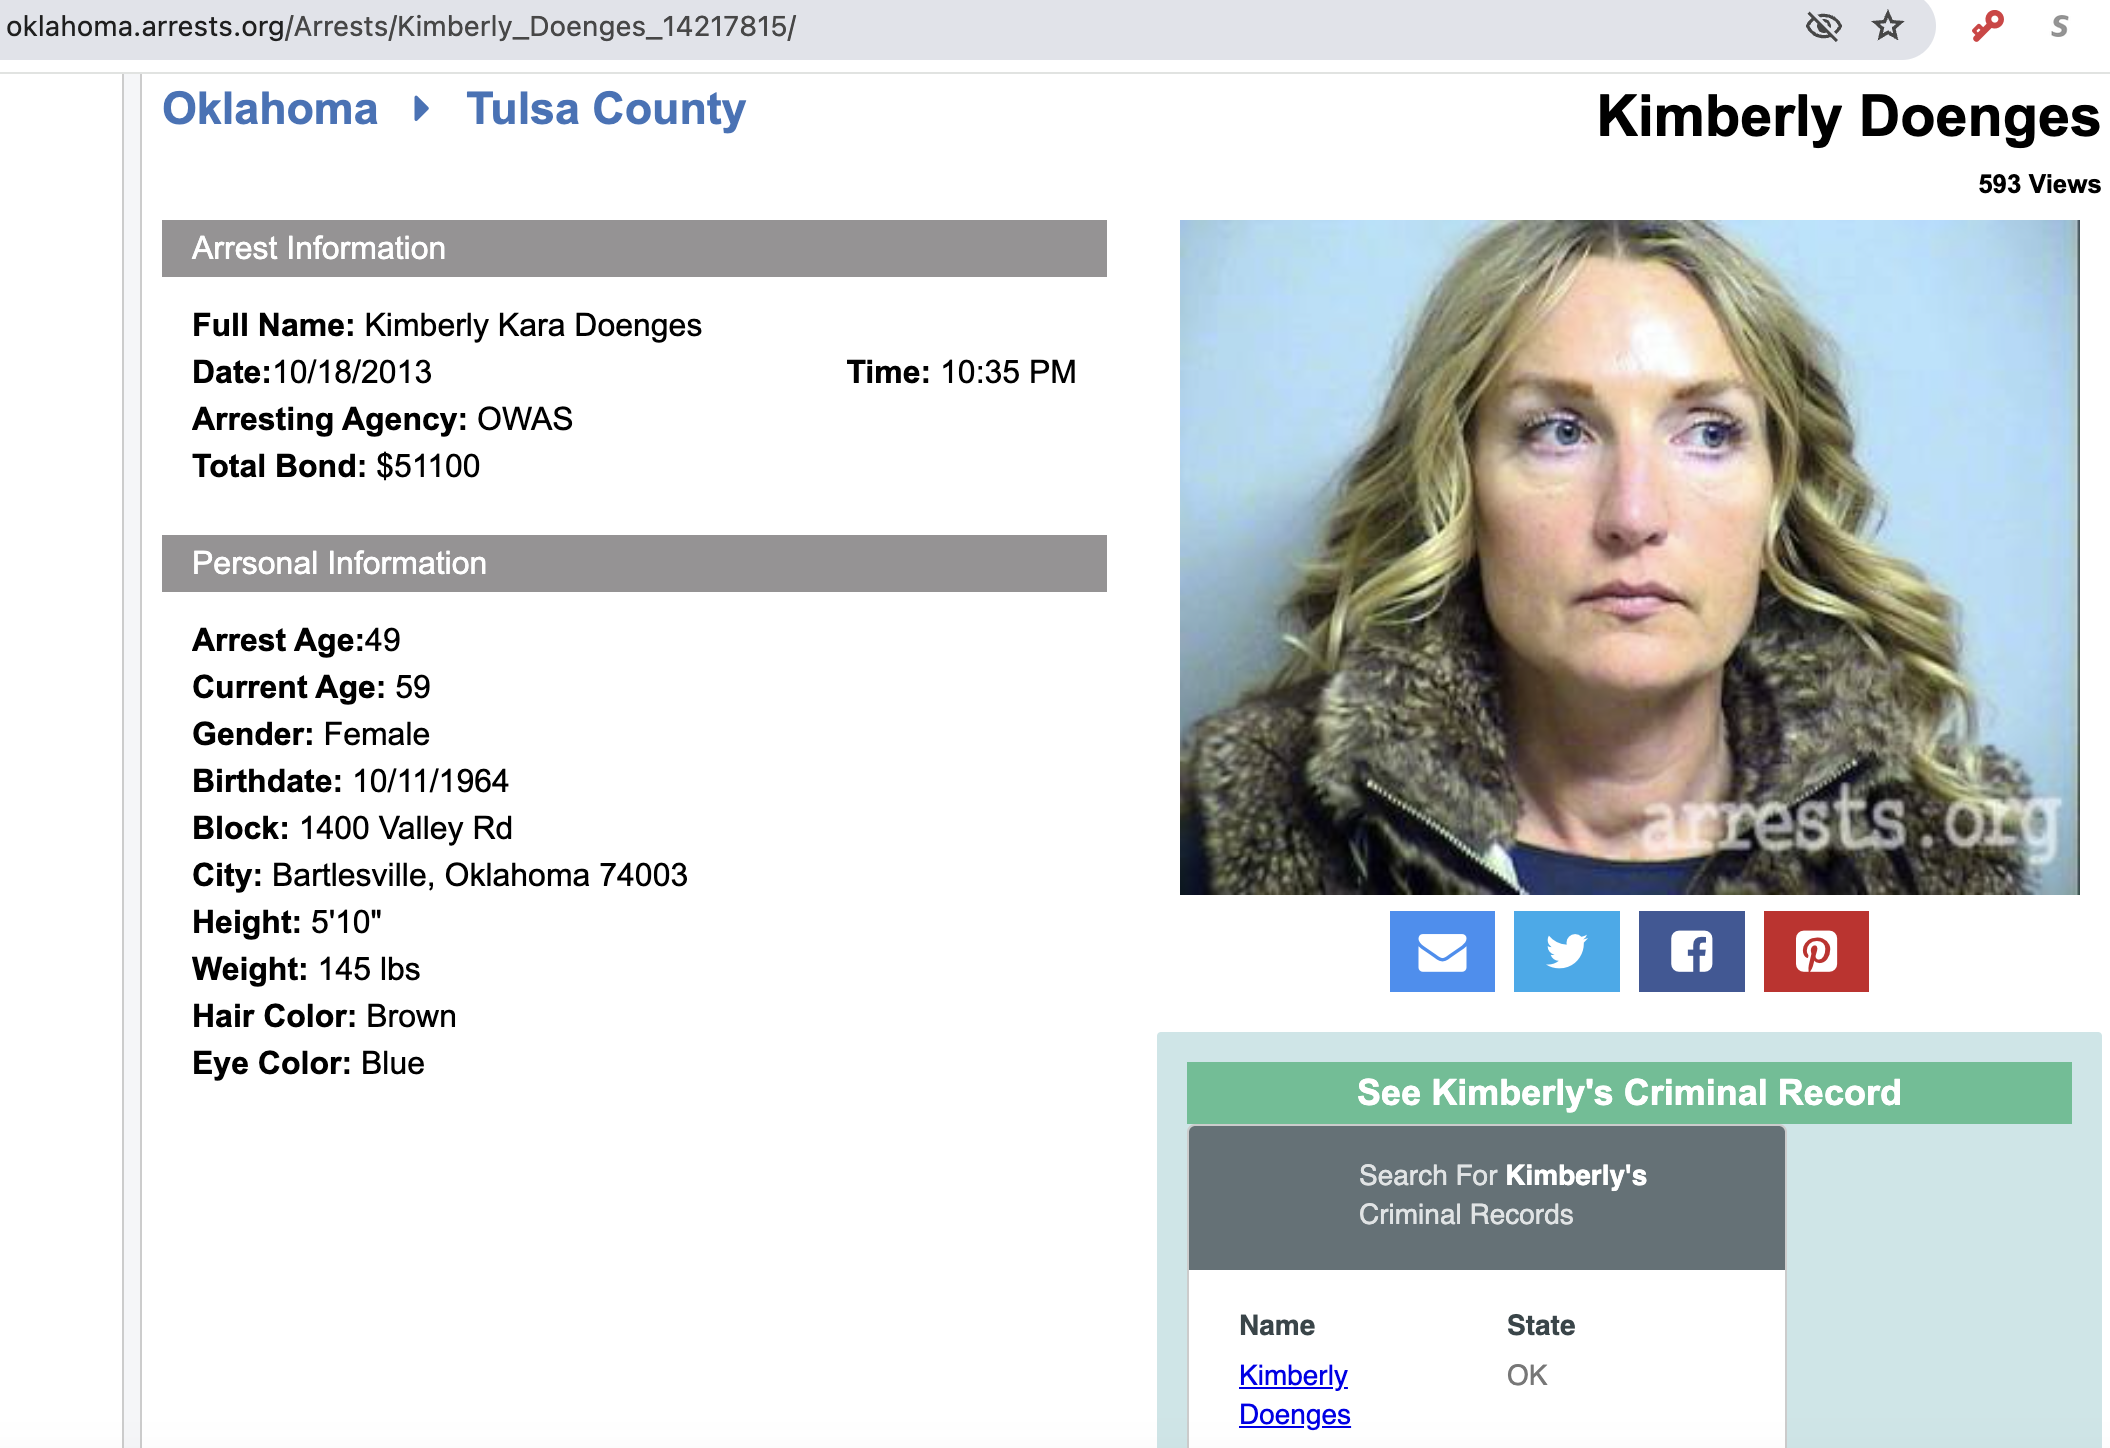 Kimberly Doenges Child Endangerment Charges